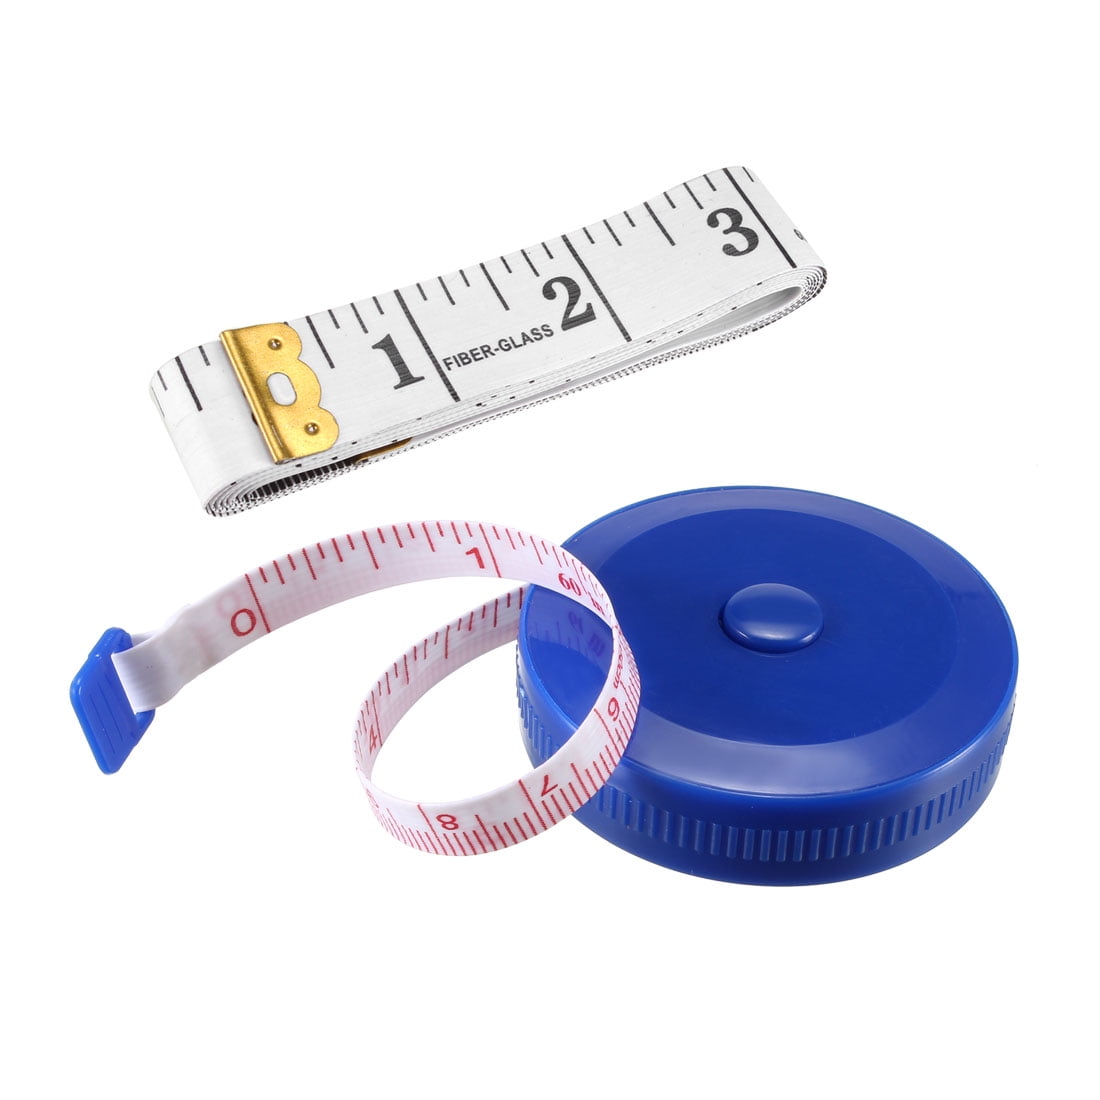 24 Pieces Retractable Measuring Tape Colorful Push Button Measure Tape Soft Sewing Measure Tapes for Body Fabric Sewing Tailor Cloth Measurement